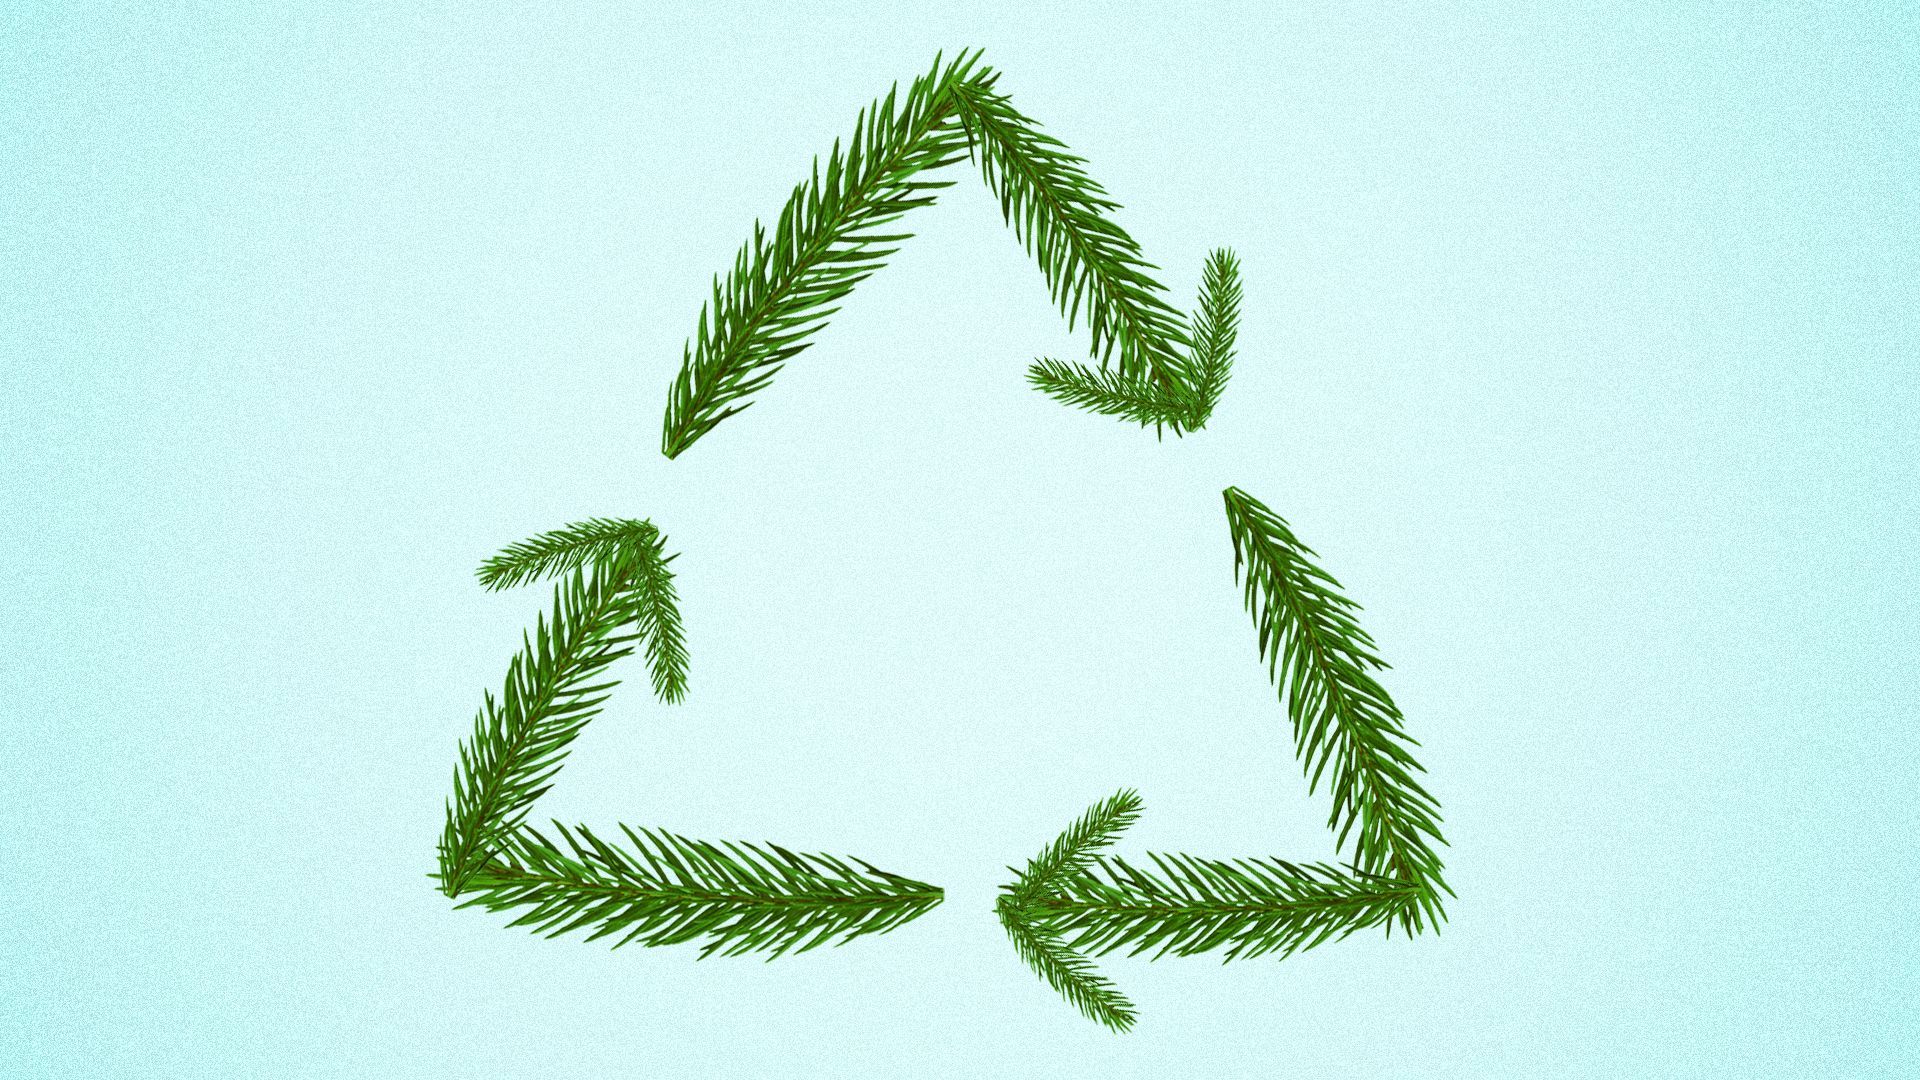 Illustration of a recycling symbol made from Christmas tree pine needles.